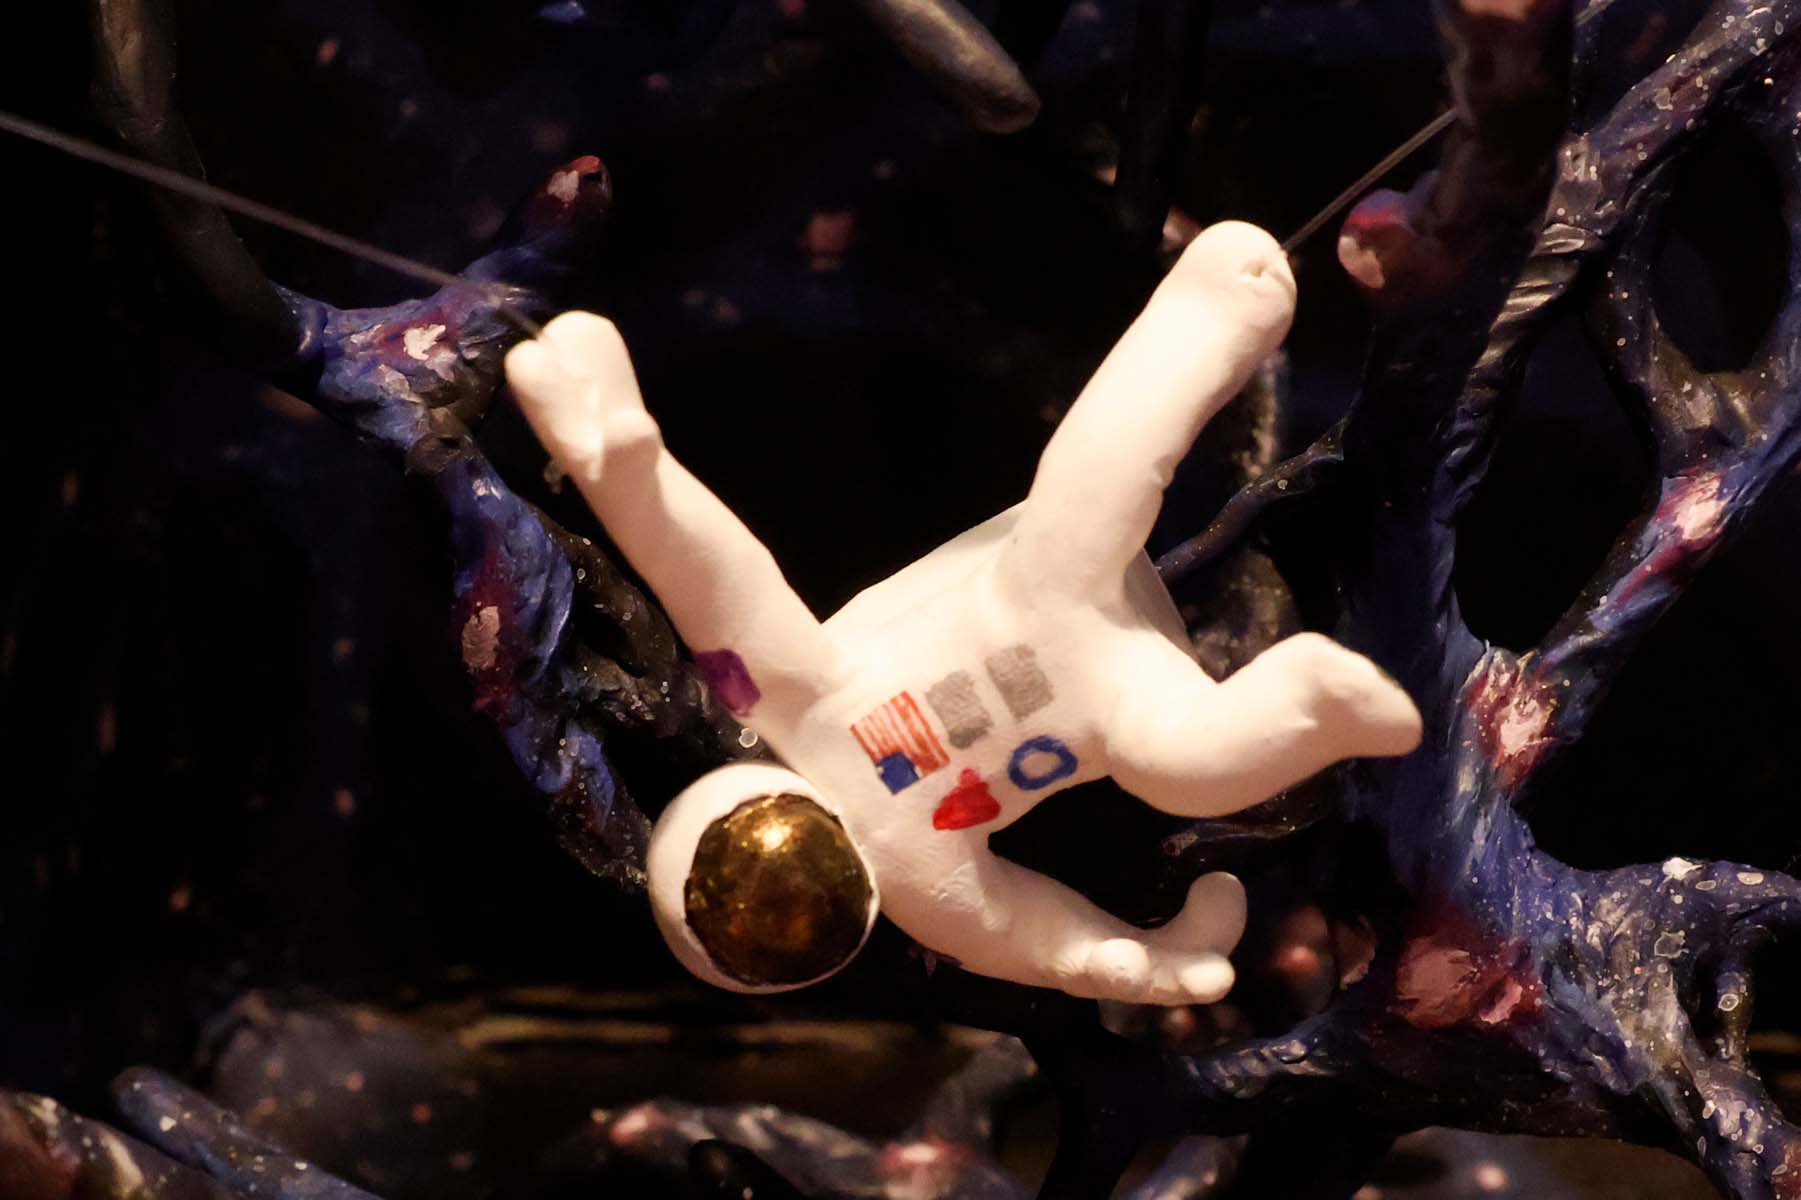 An extreme closeup of the astronaut near the spider. An American flag, a red triangle, and a blue circle are visible on the chest pack of their space suit.